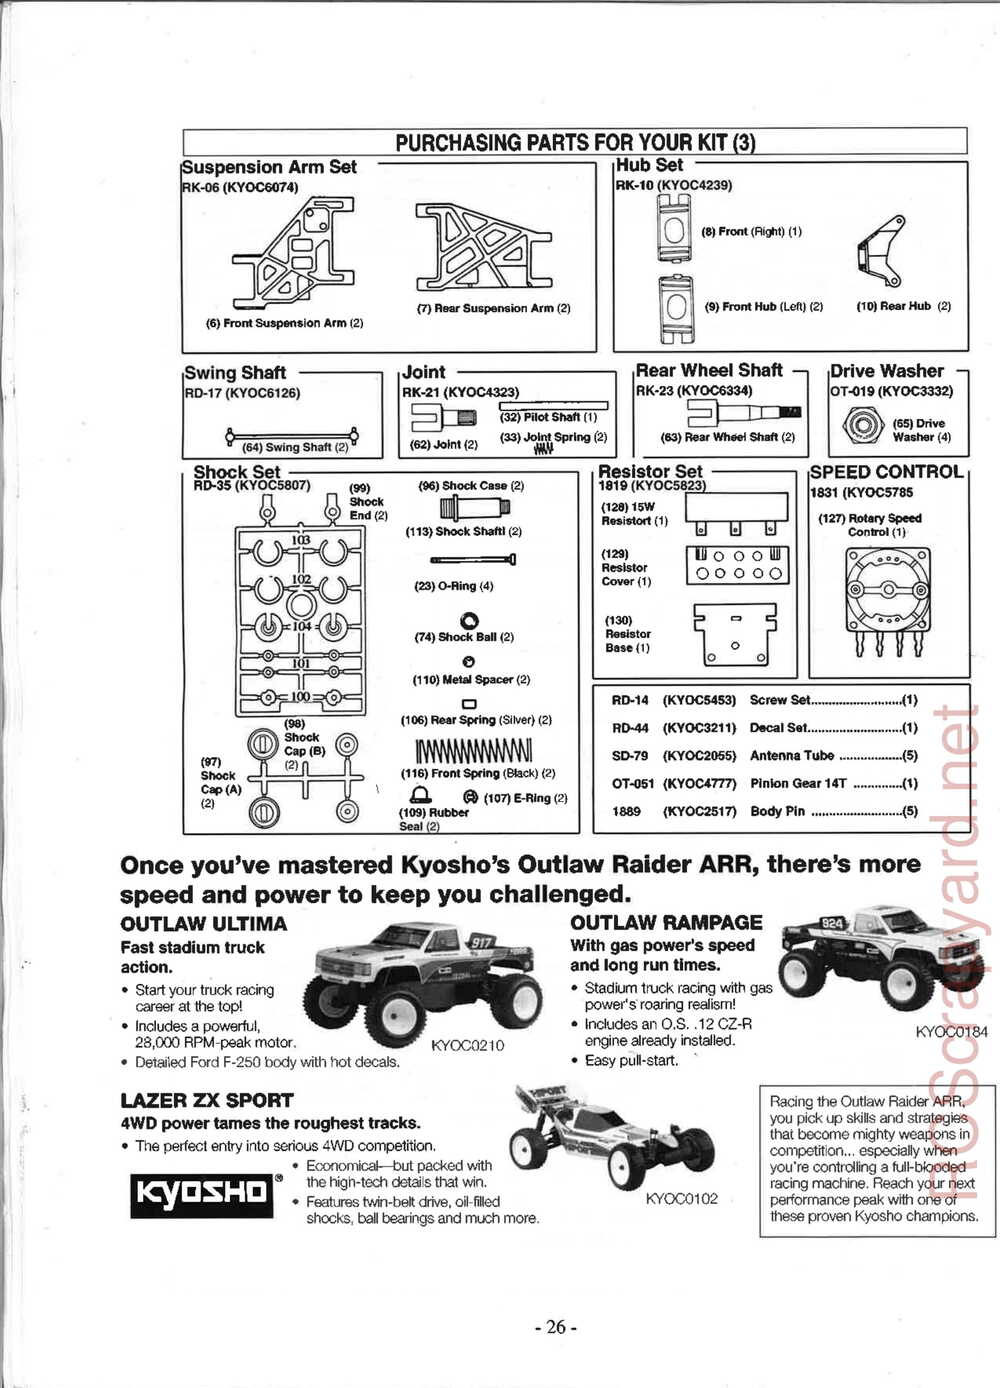 Kyosho - 3162H - Outlaw-Raider ARR - Manual - Page 26